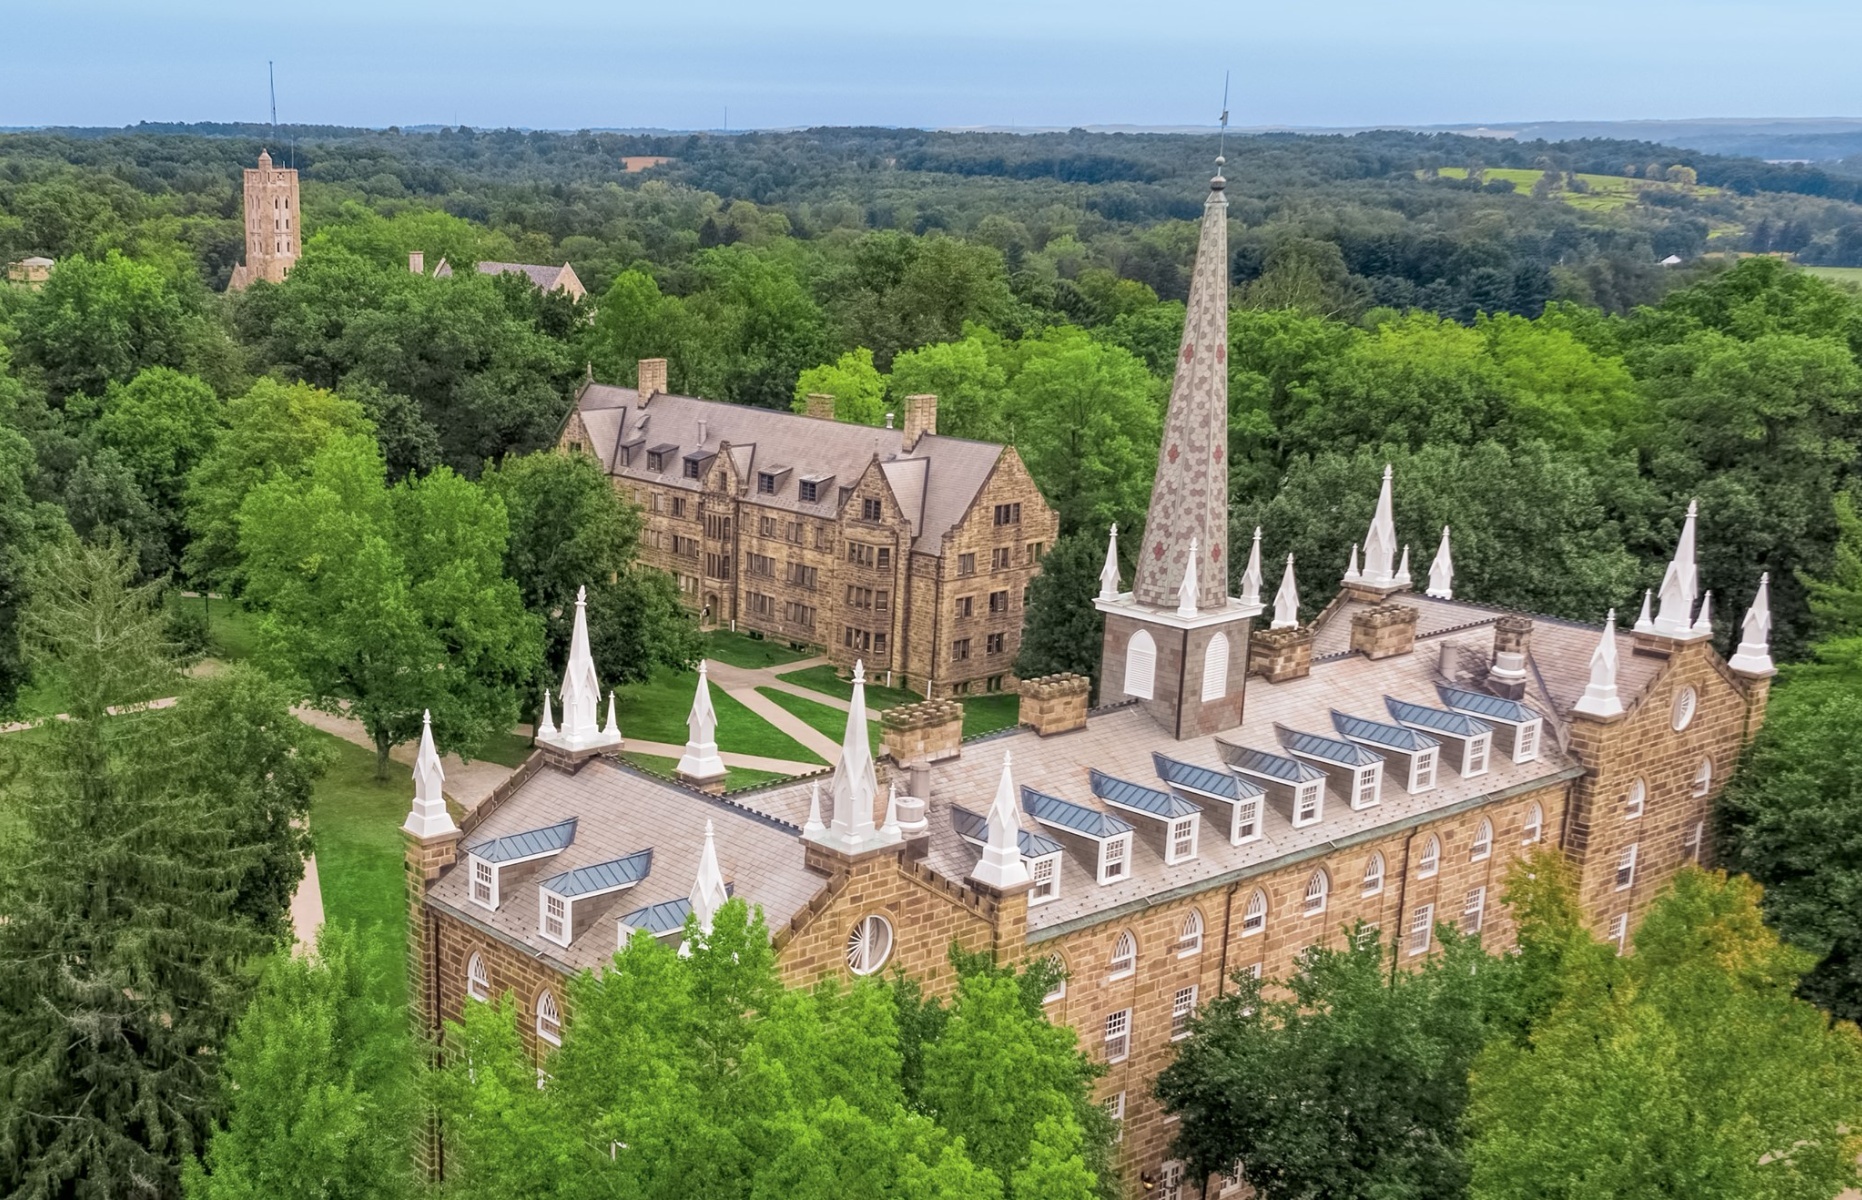 <p><a href="http://www.kenyon.edu/" rel="noreferrer noopener">Kenyon College</a> is located on a hilltop in the village of Gambier, Ohio, where students can take advantage of beautiful hiking trails and attend classes in magnificent Gothic buildings.</p>